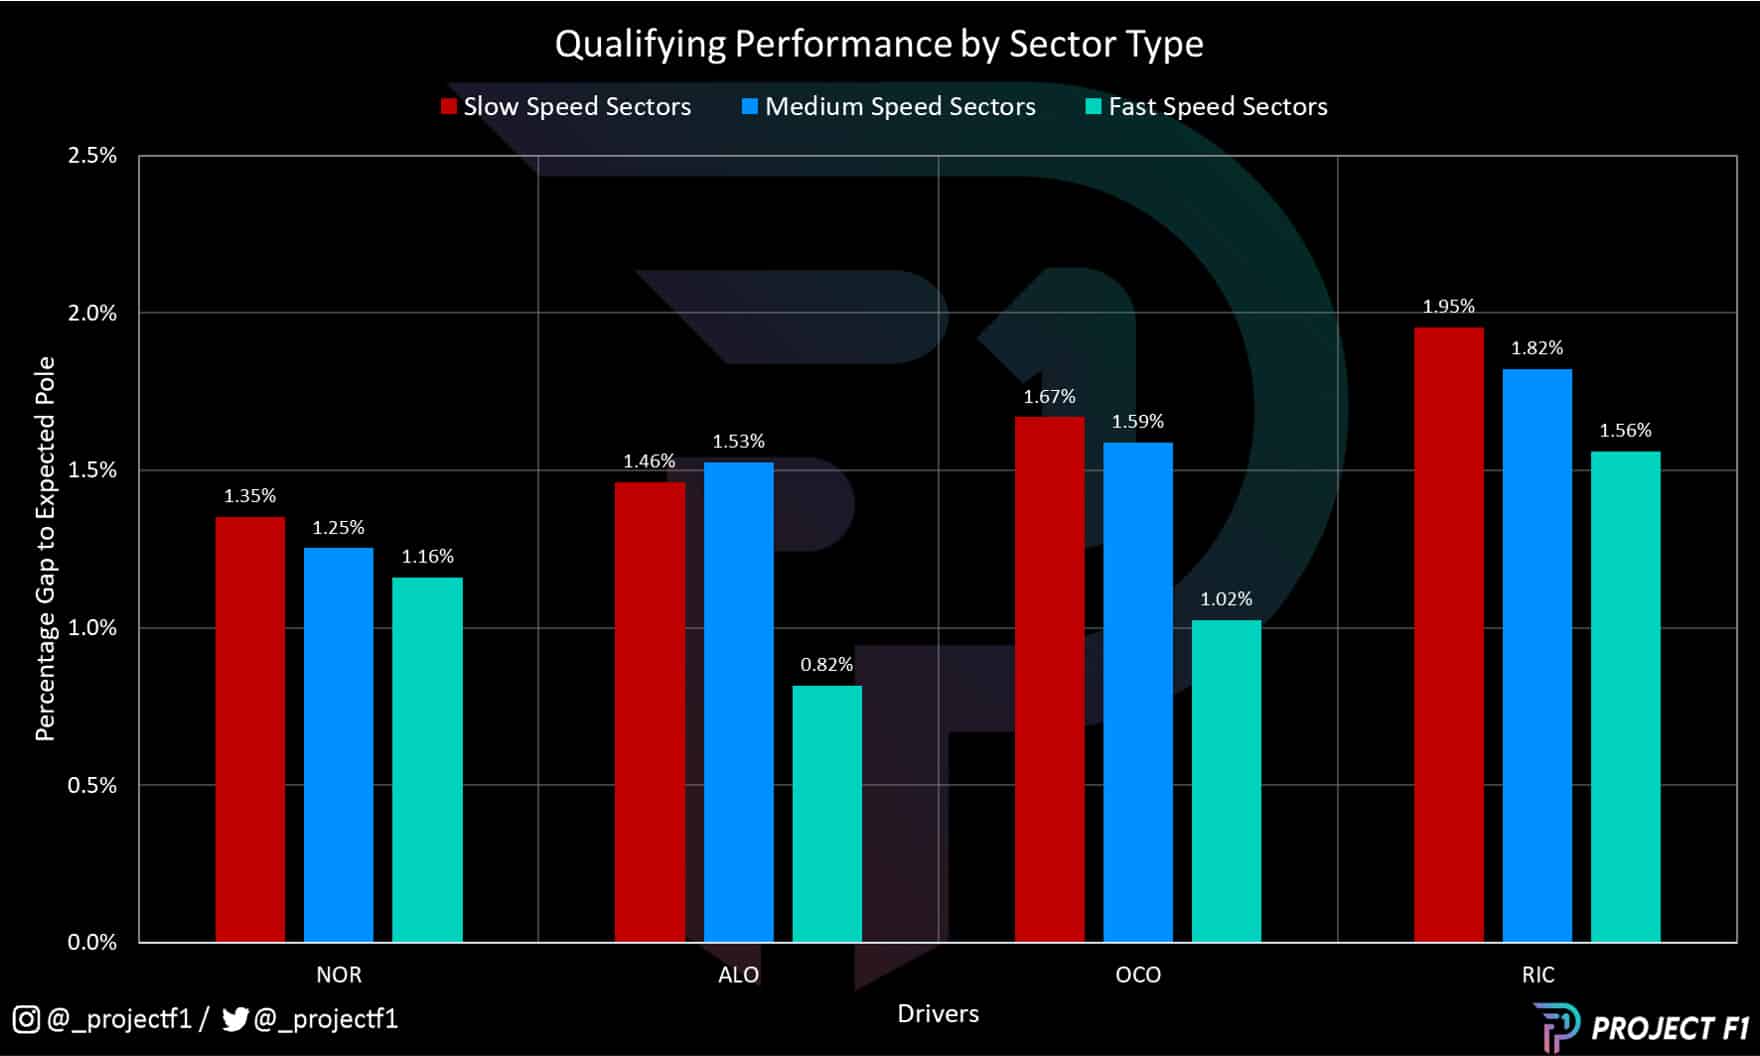 McLaren vs Alpine 2022 F1 qualifying pace by sector type